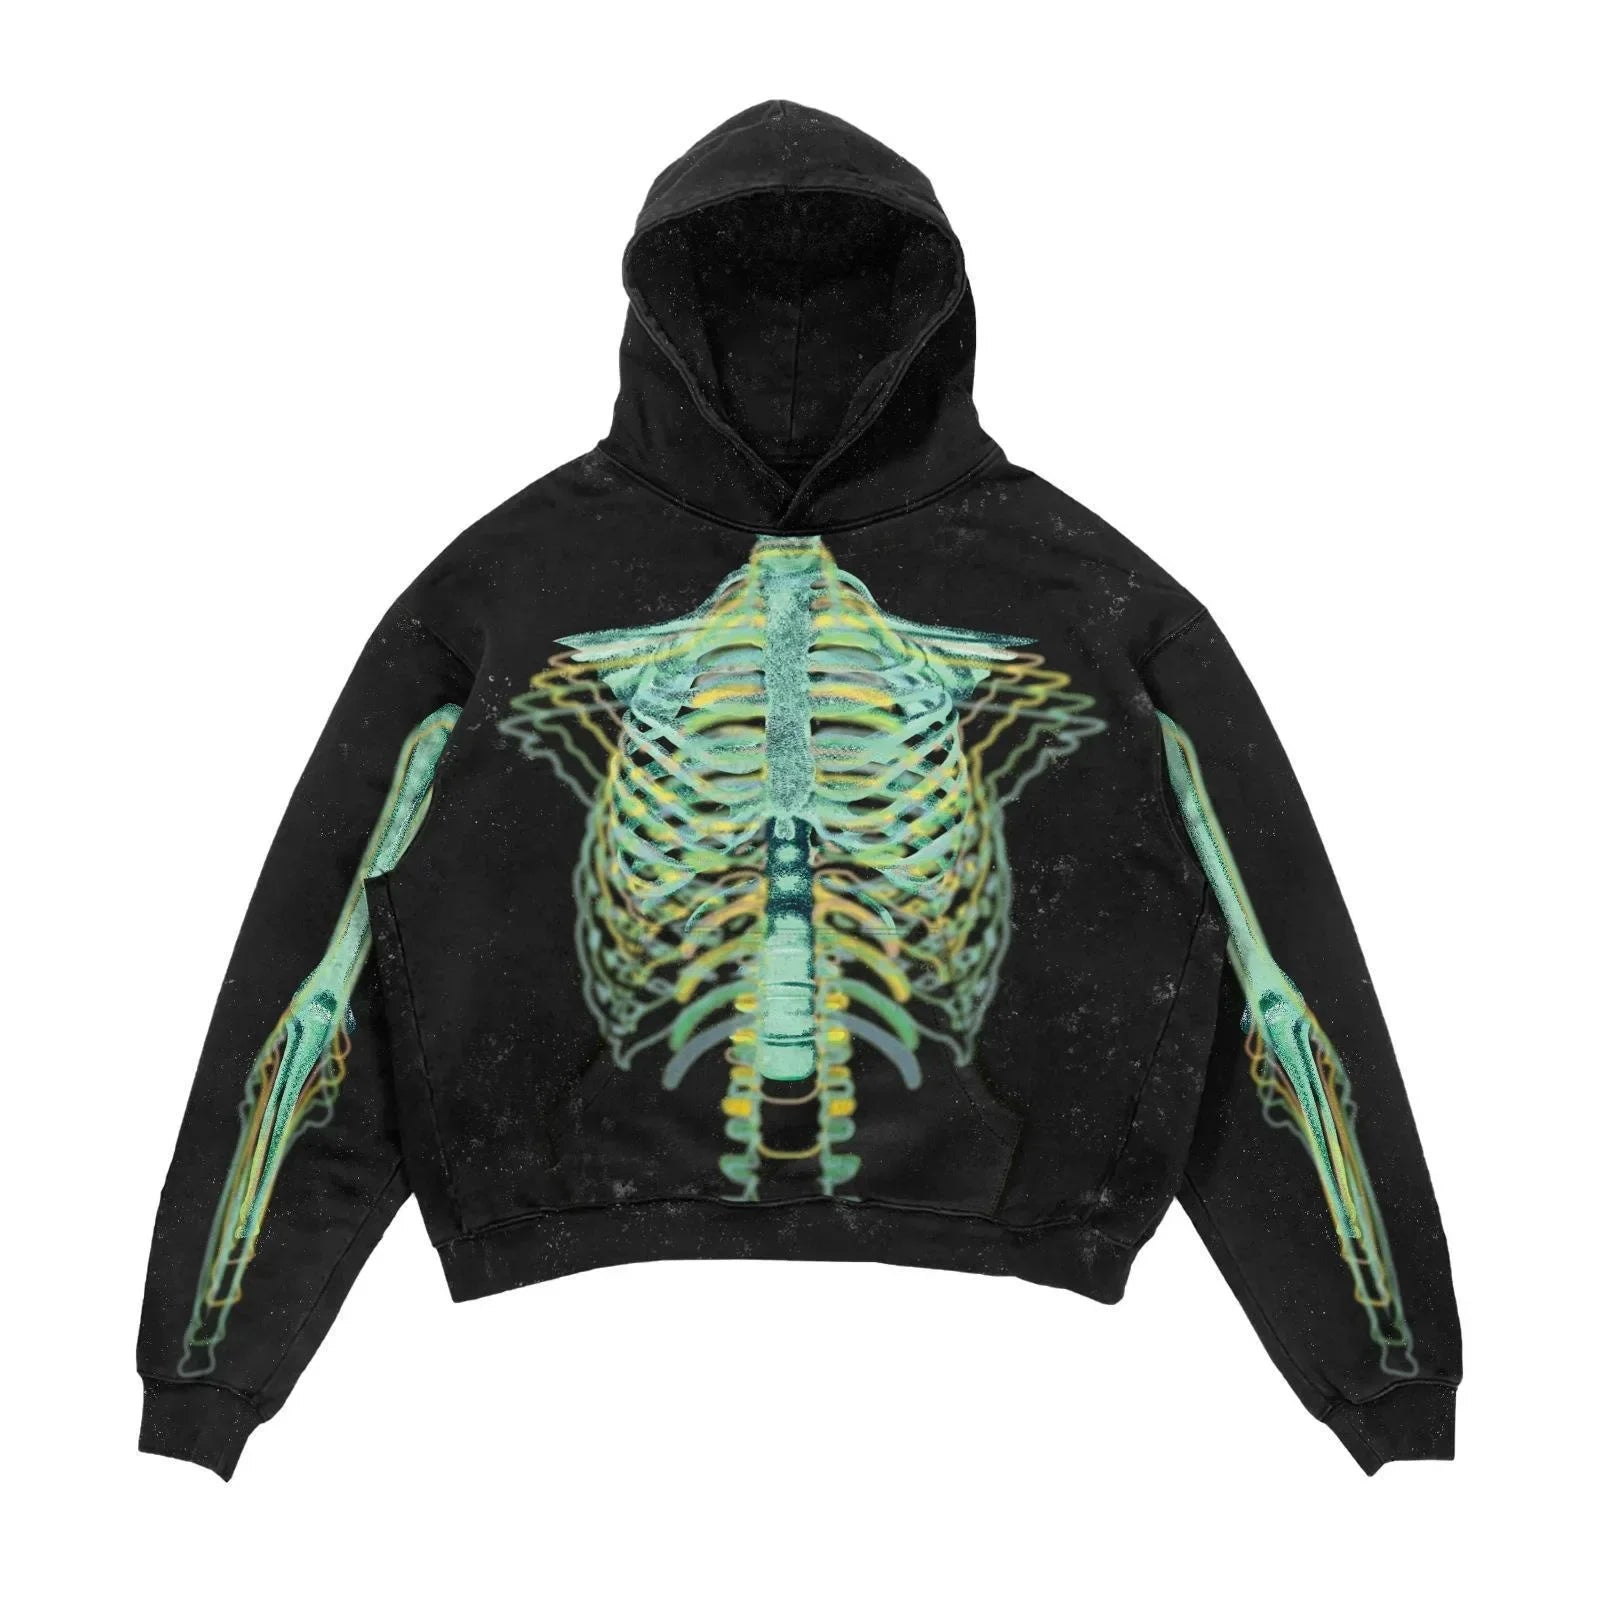 A black hooded sweatshirt featuring a detailed, greenish ribcage and skeletal arm design printed on the front, this Maramalive™ Explosions Printed Skull Y2K Retro Hooded Sweater Coat Street Style Gothic Casual Fashion Hooded Sweater Men's Female is perfect for men's four seasons wear.